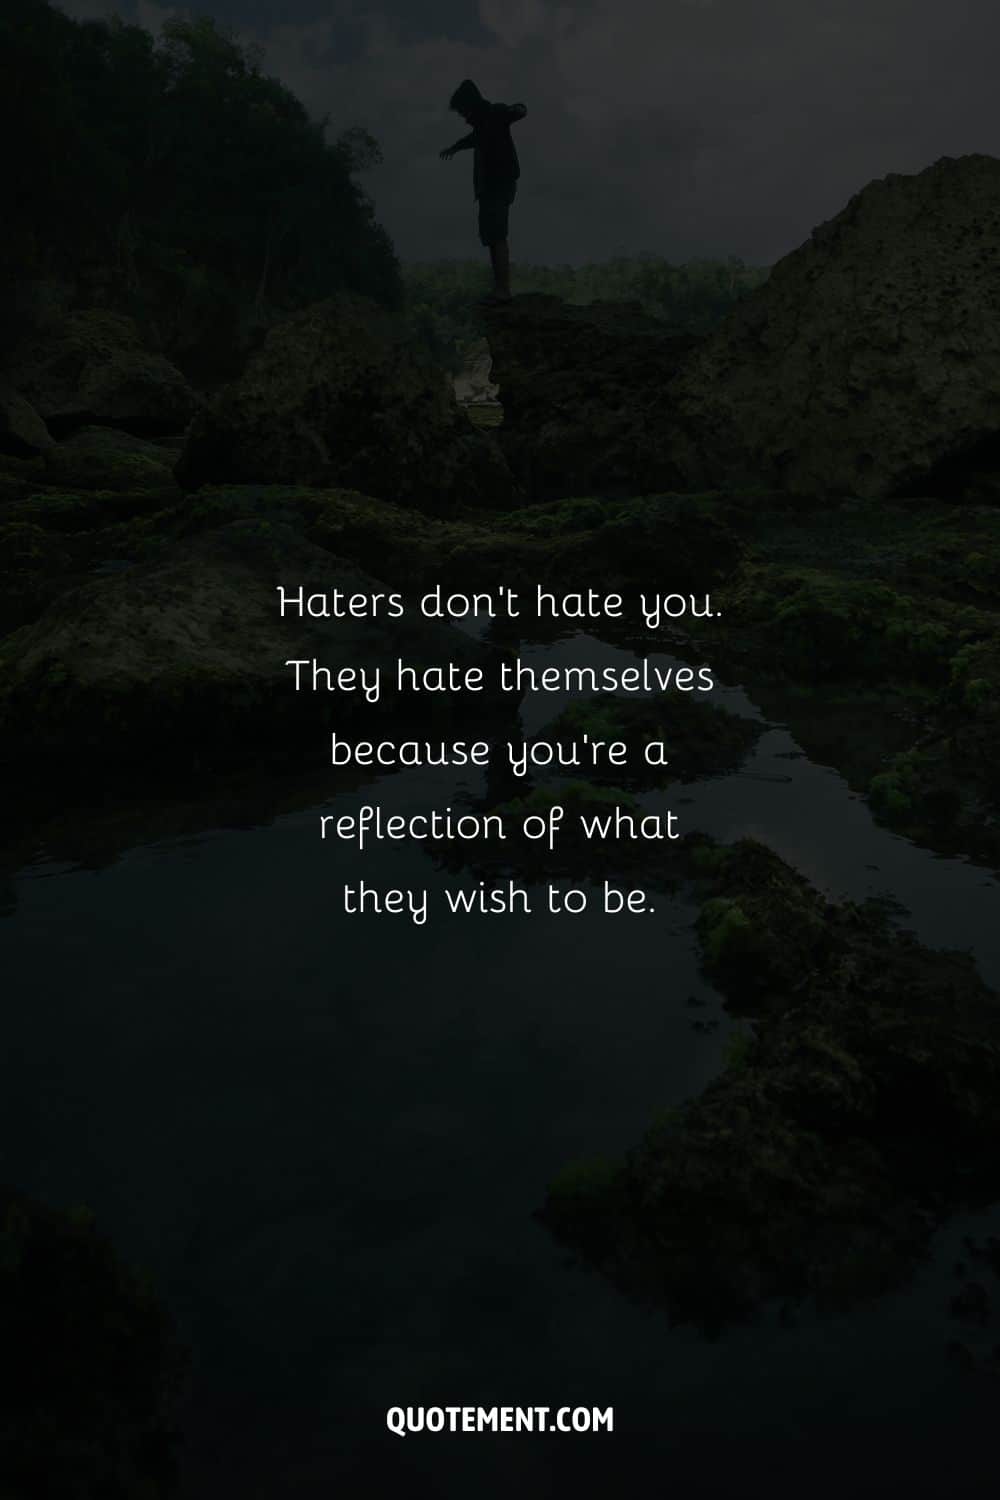 Haters don’t hate you. They hate themselves because you’re a reflection of what they wish to be.